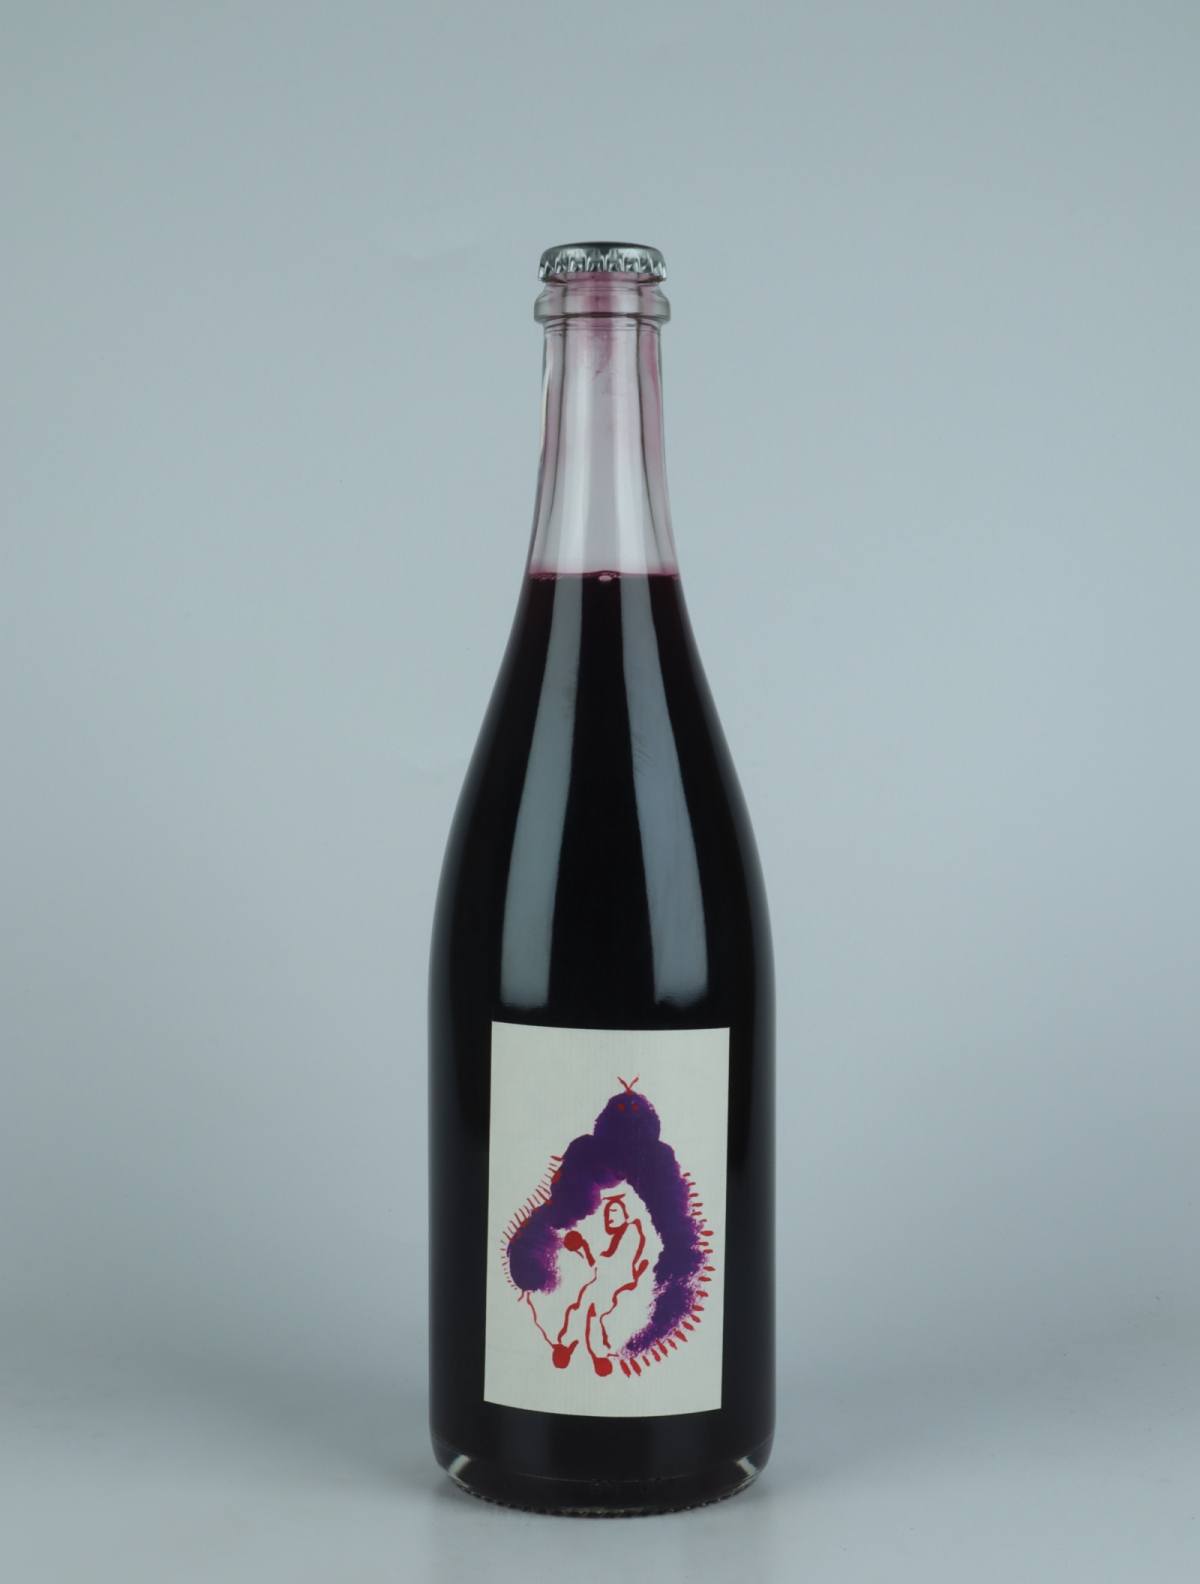 A bottle 2022 Catifiea Red wine from Absurde Génie des Fleurs, Languedoc in France